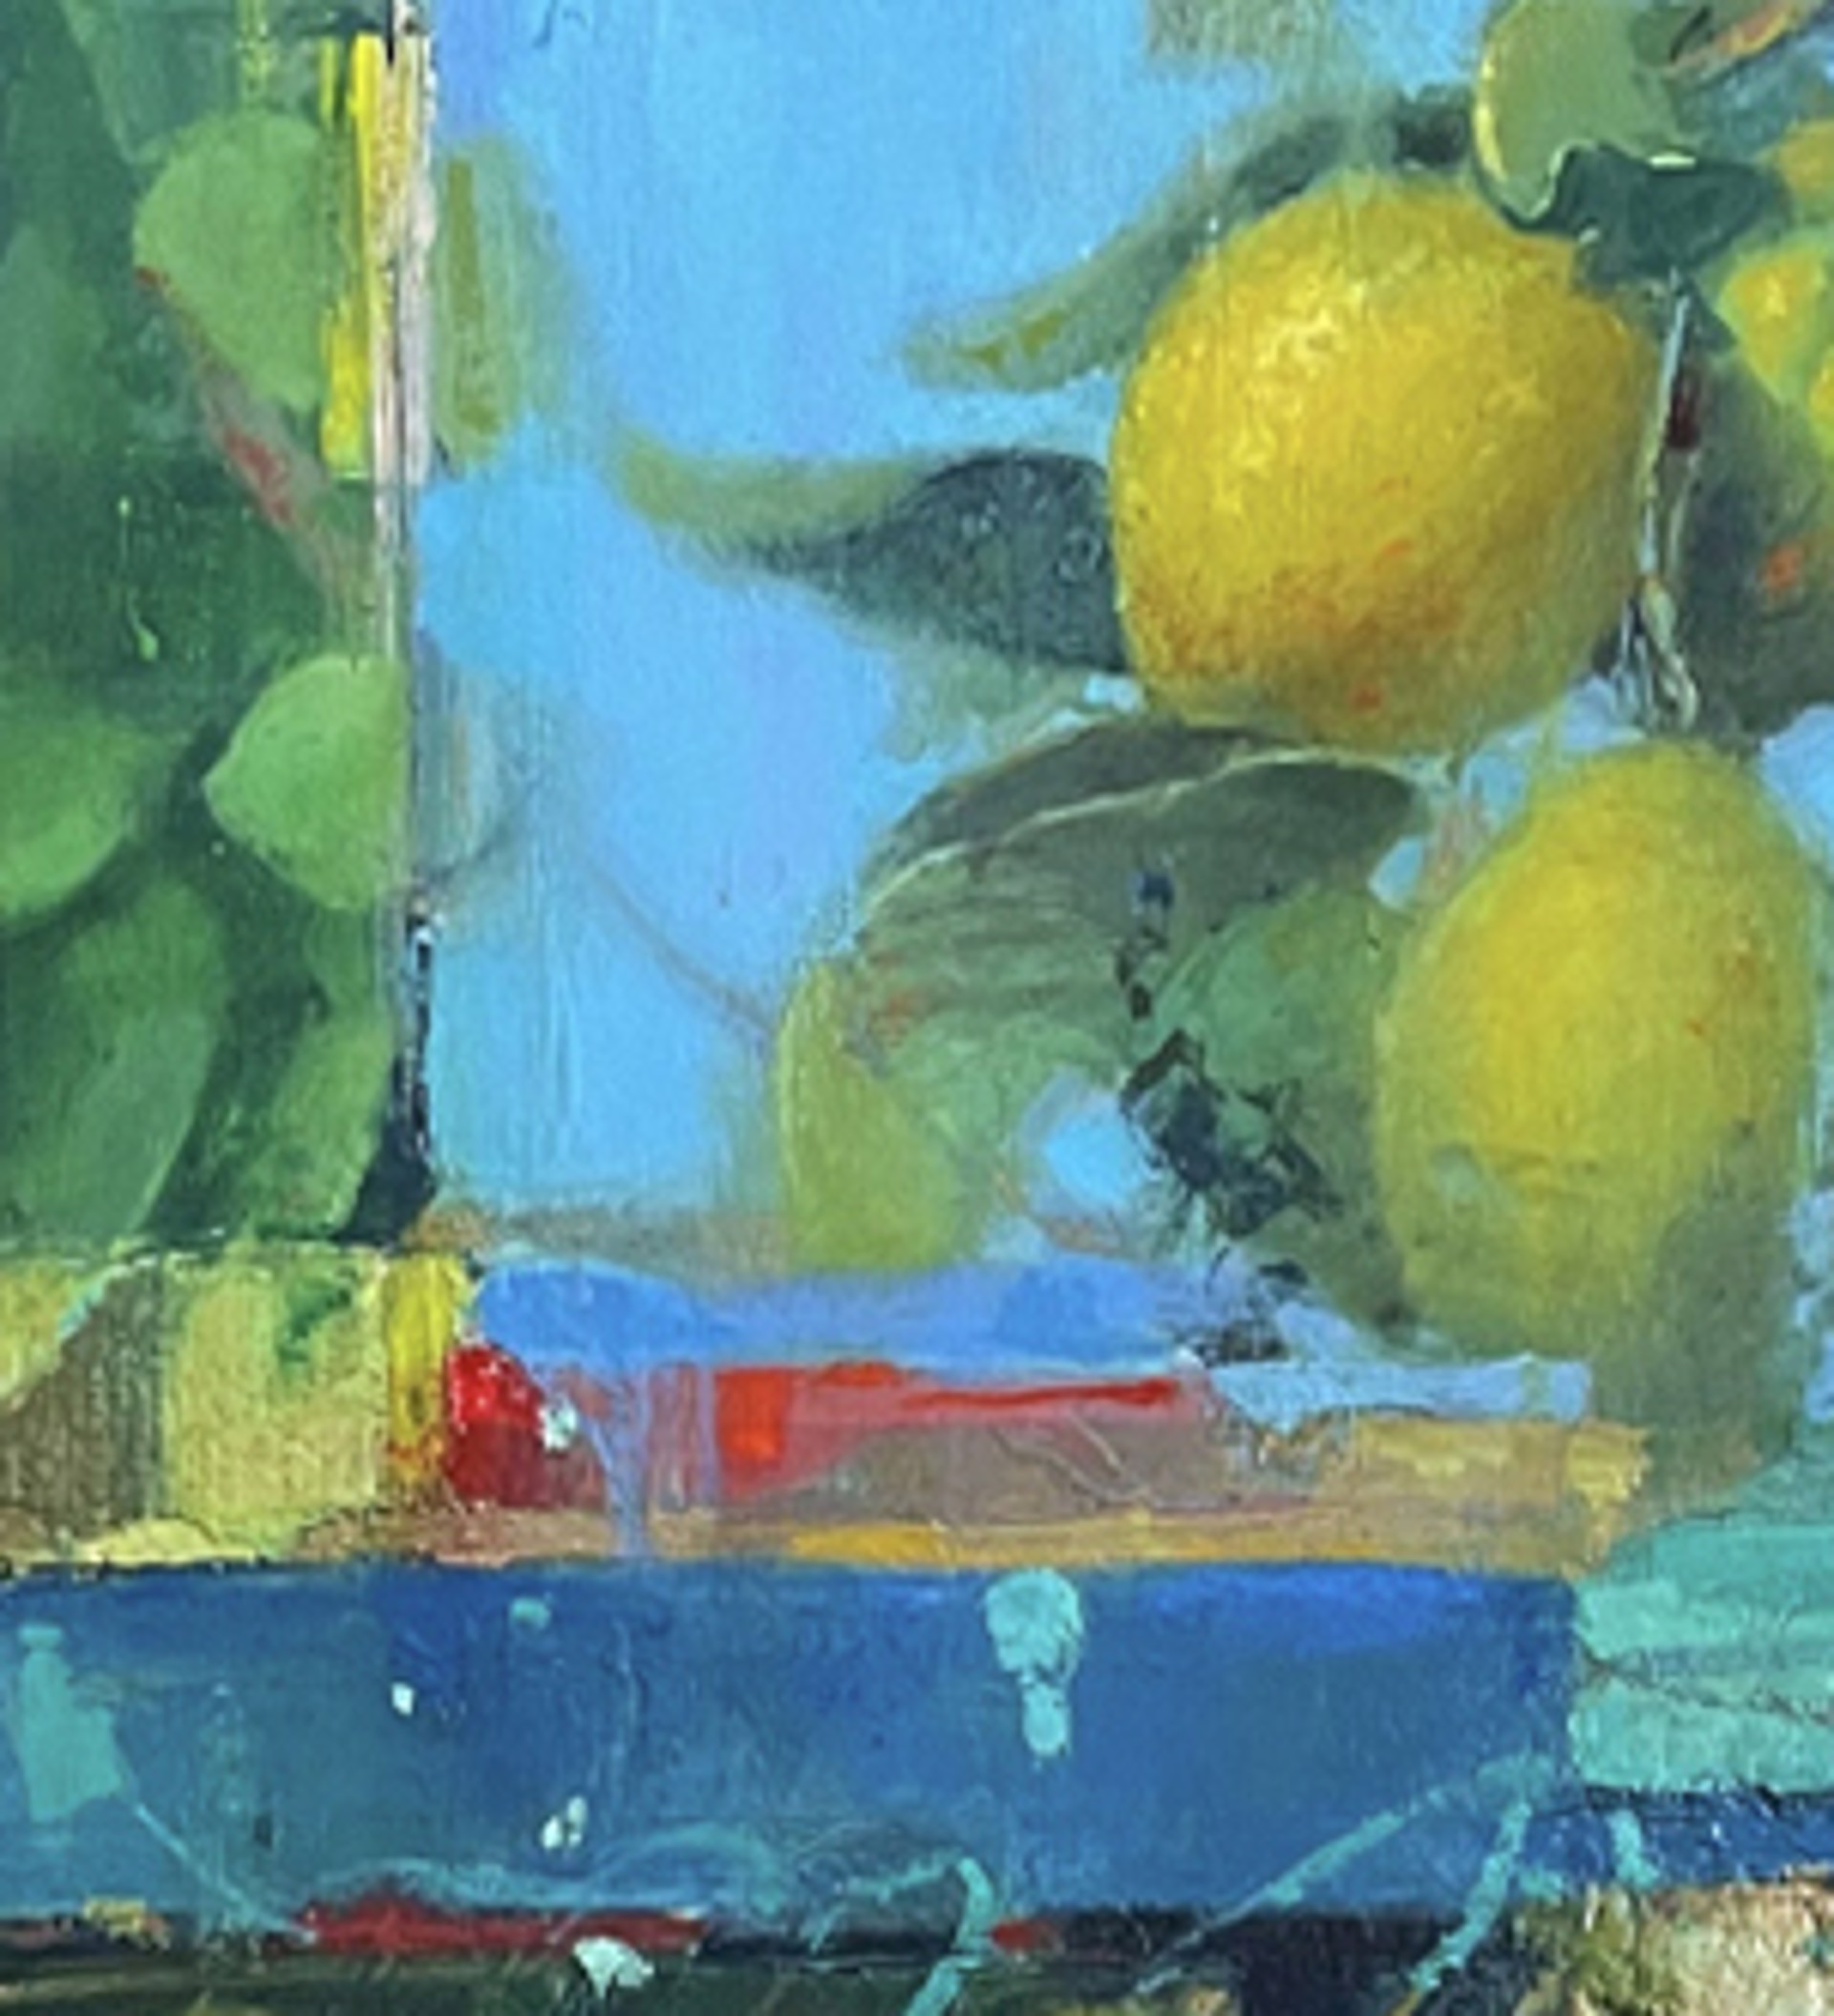 Lemons in the Abstract by Christopher Groves